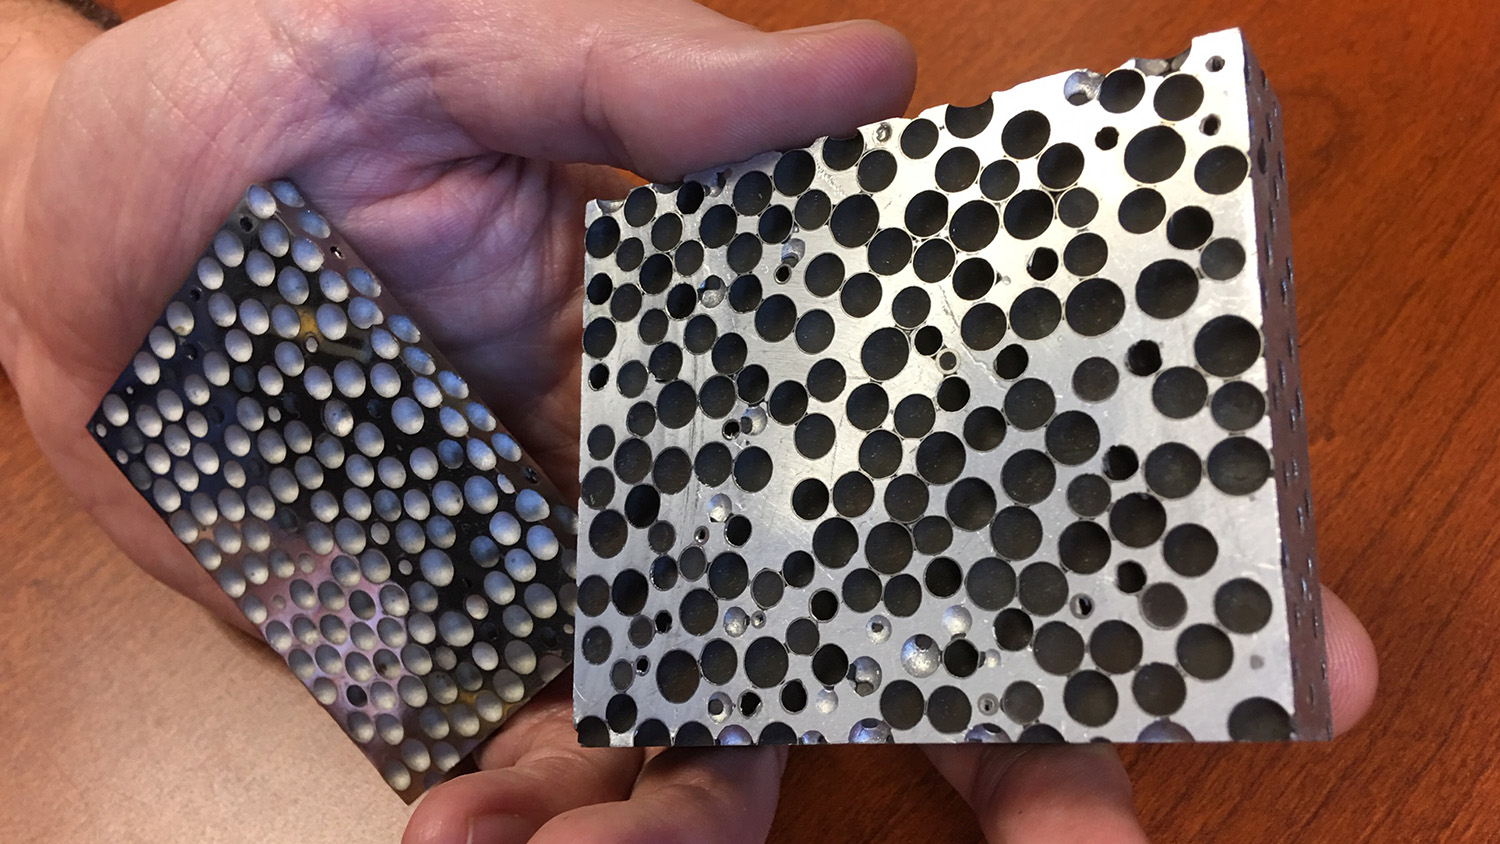 Closeup image of composite metal (silver with black dots).